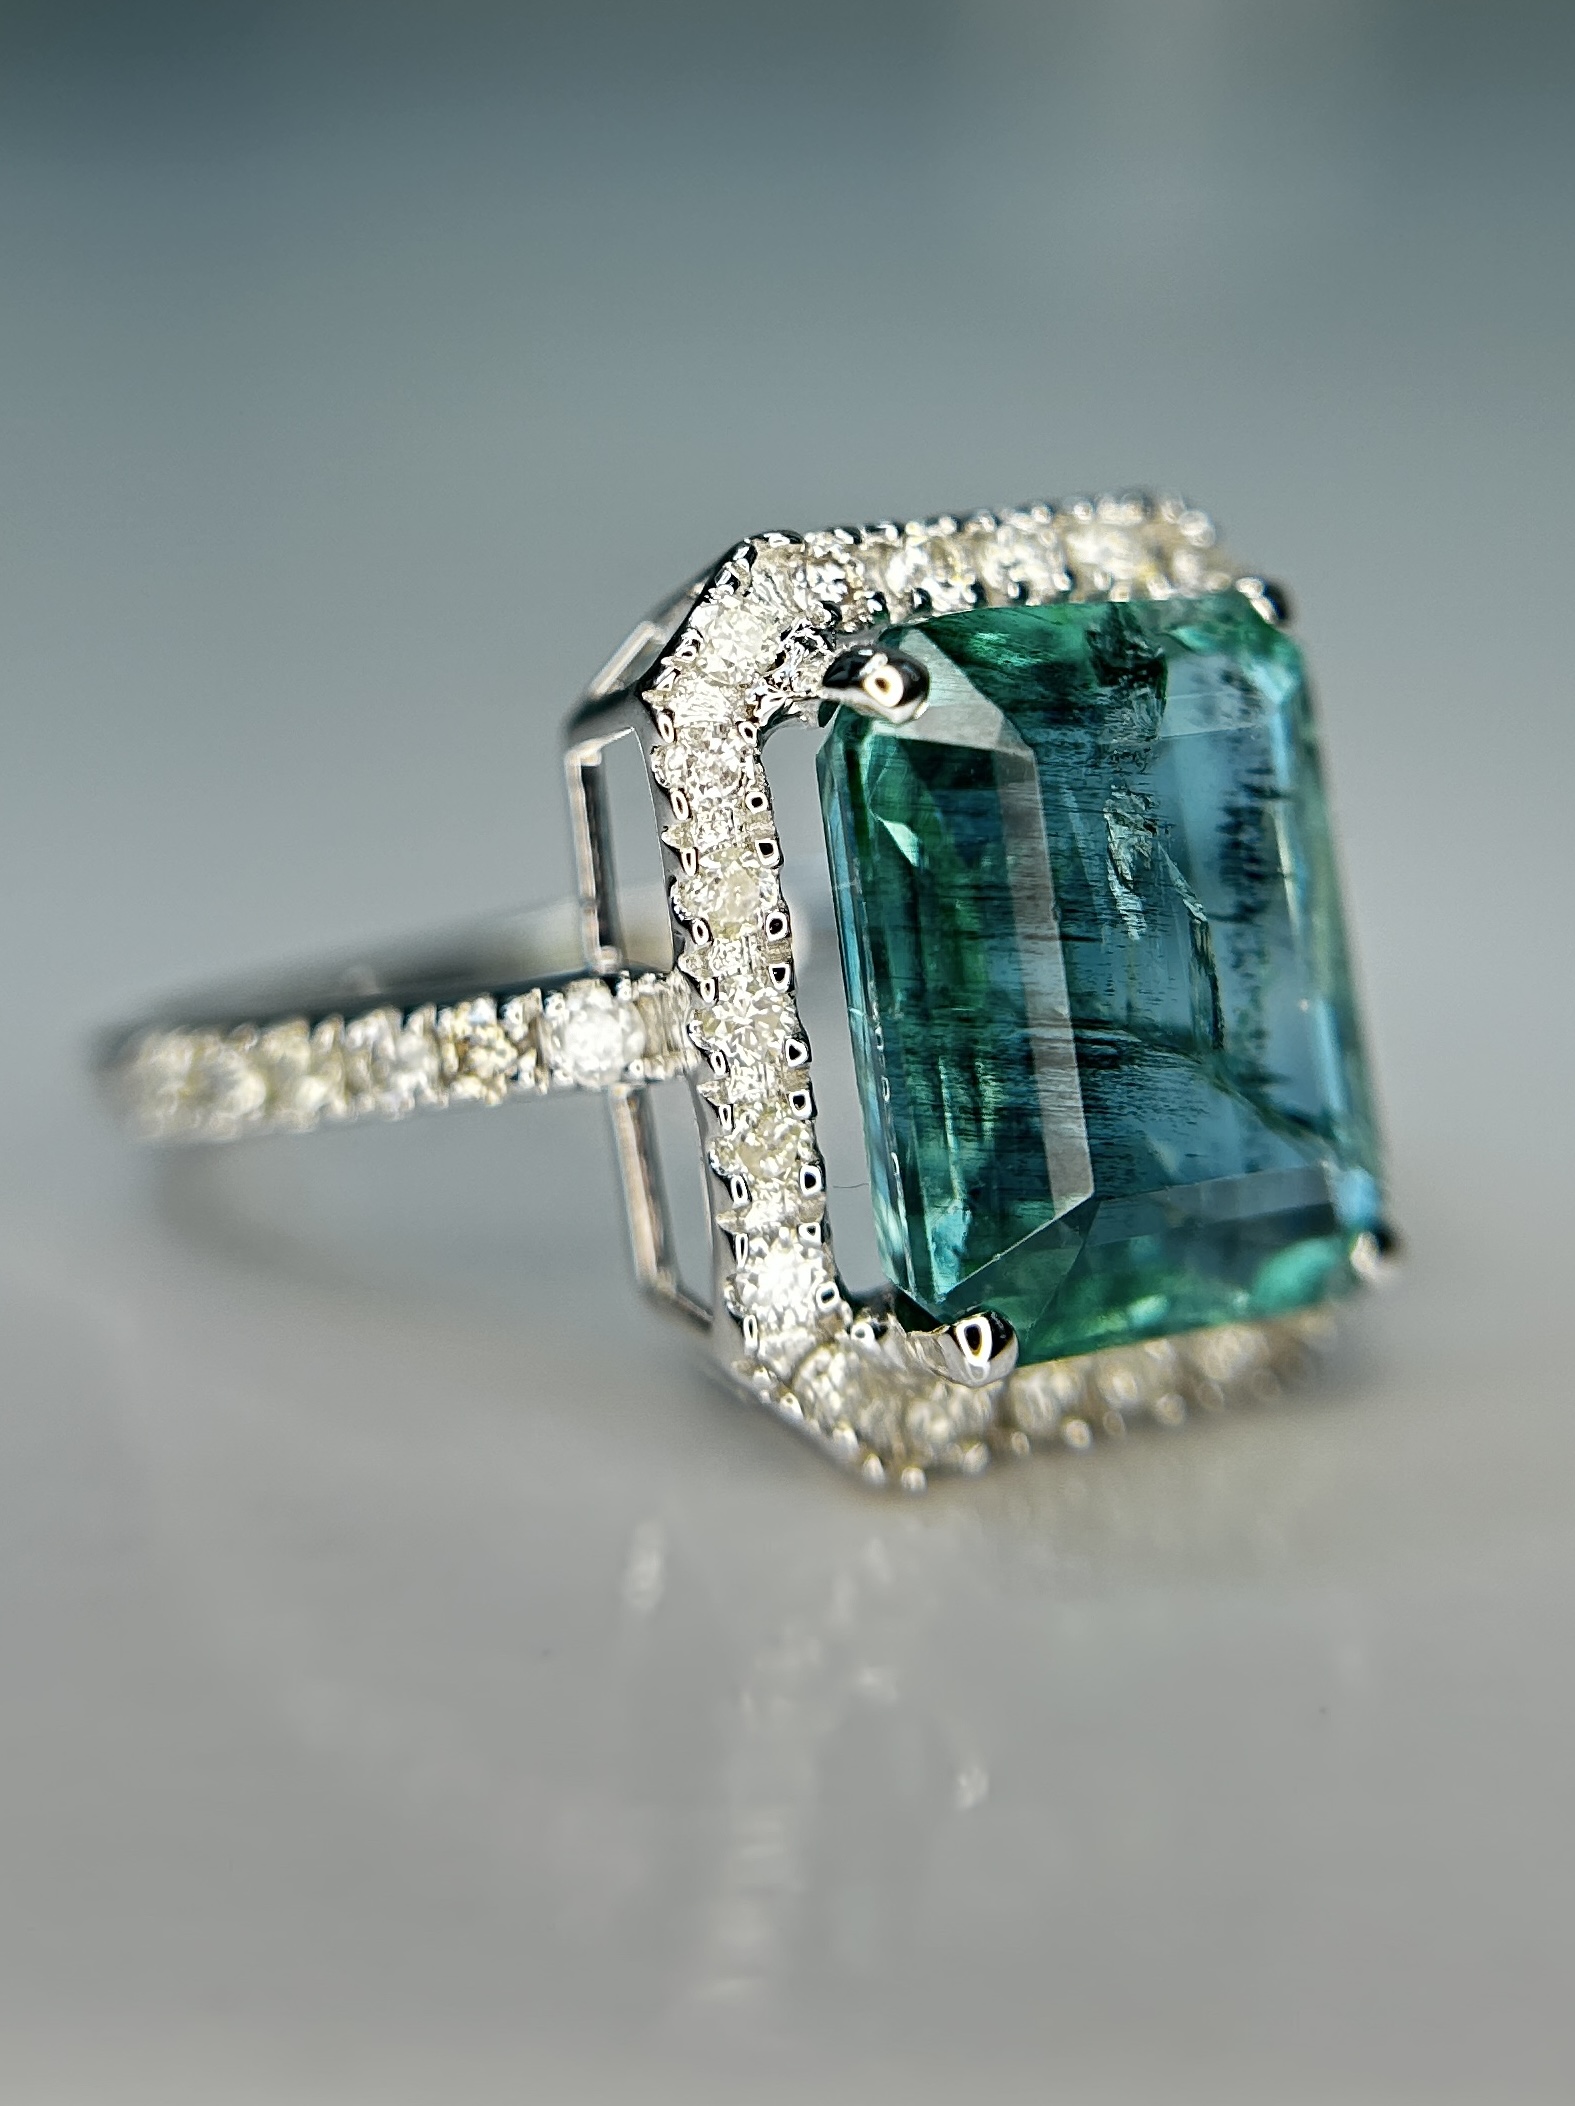 Beautiful Natural Emerald 4.27 CT With Natural Diamonds & 18kGold - Image 10 of 11